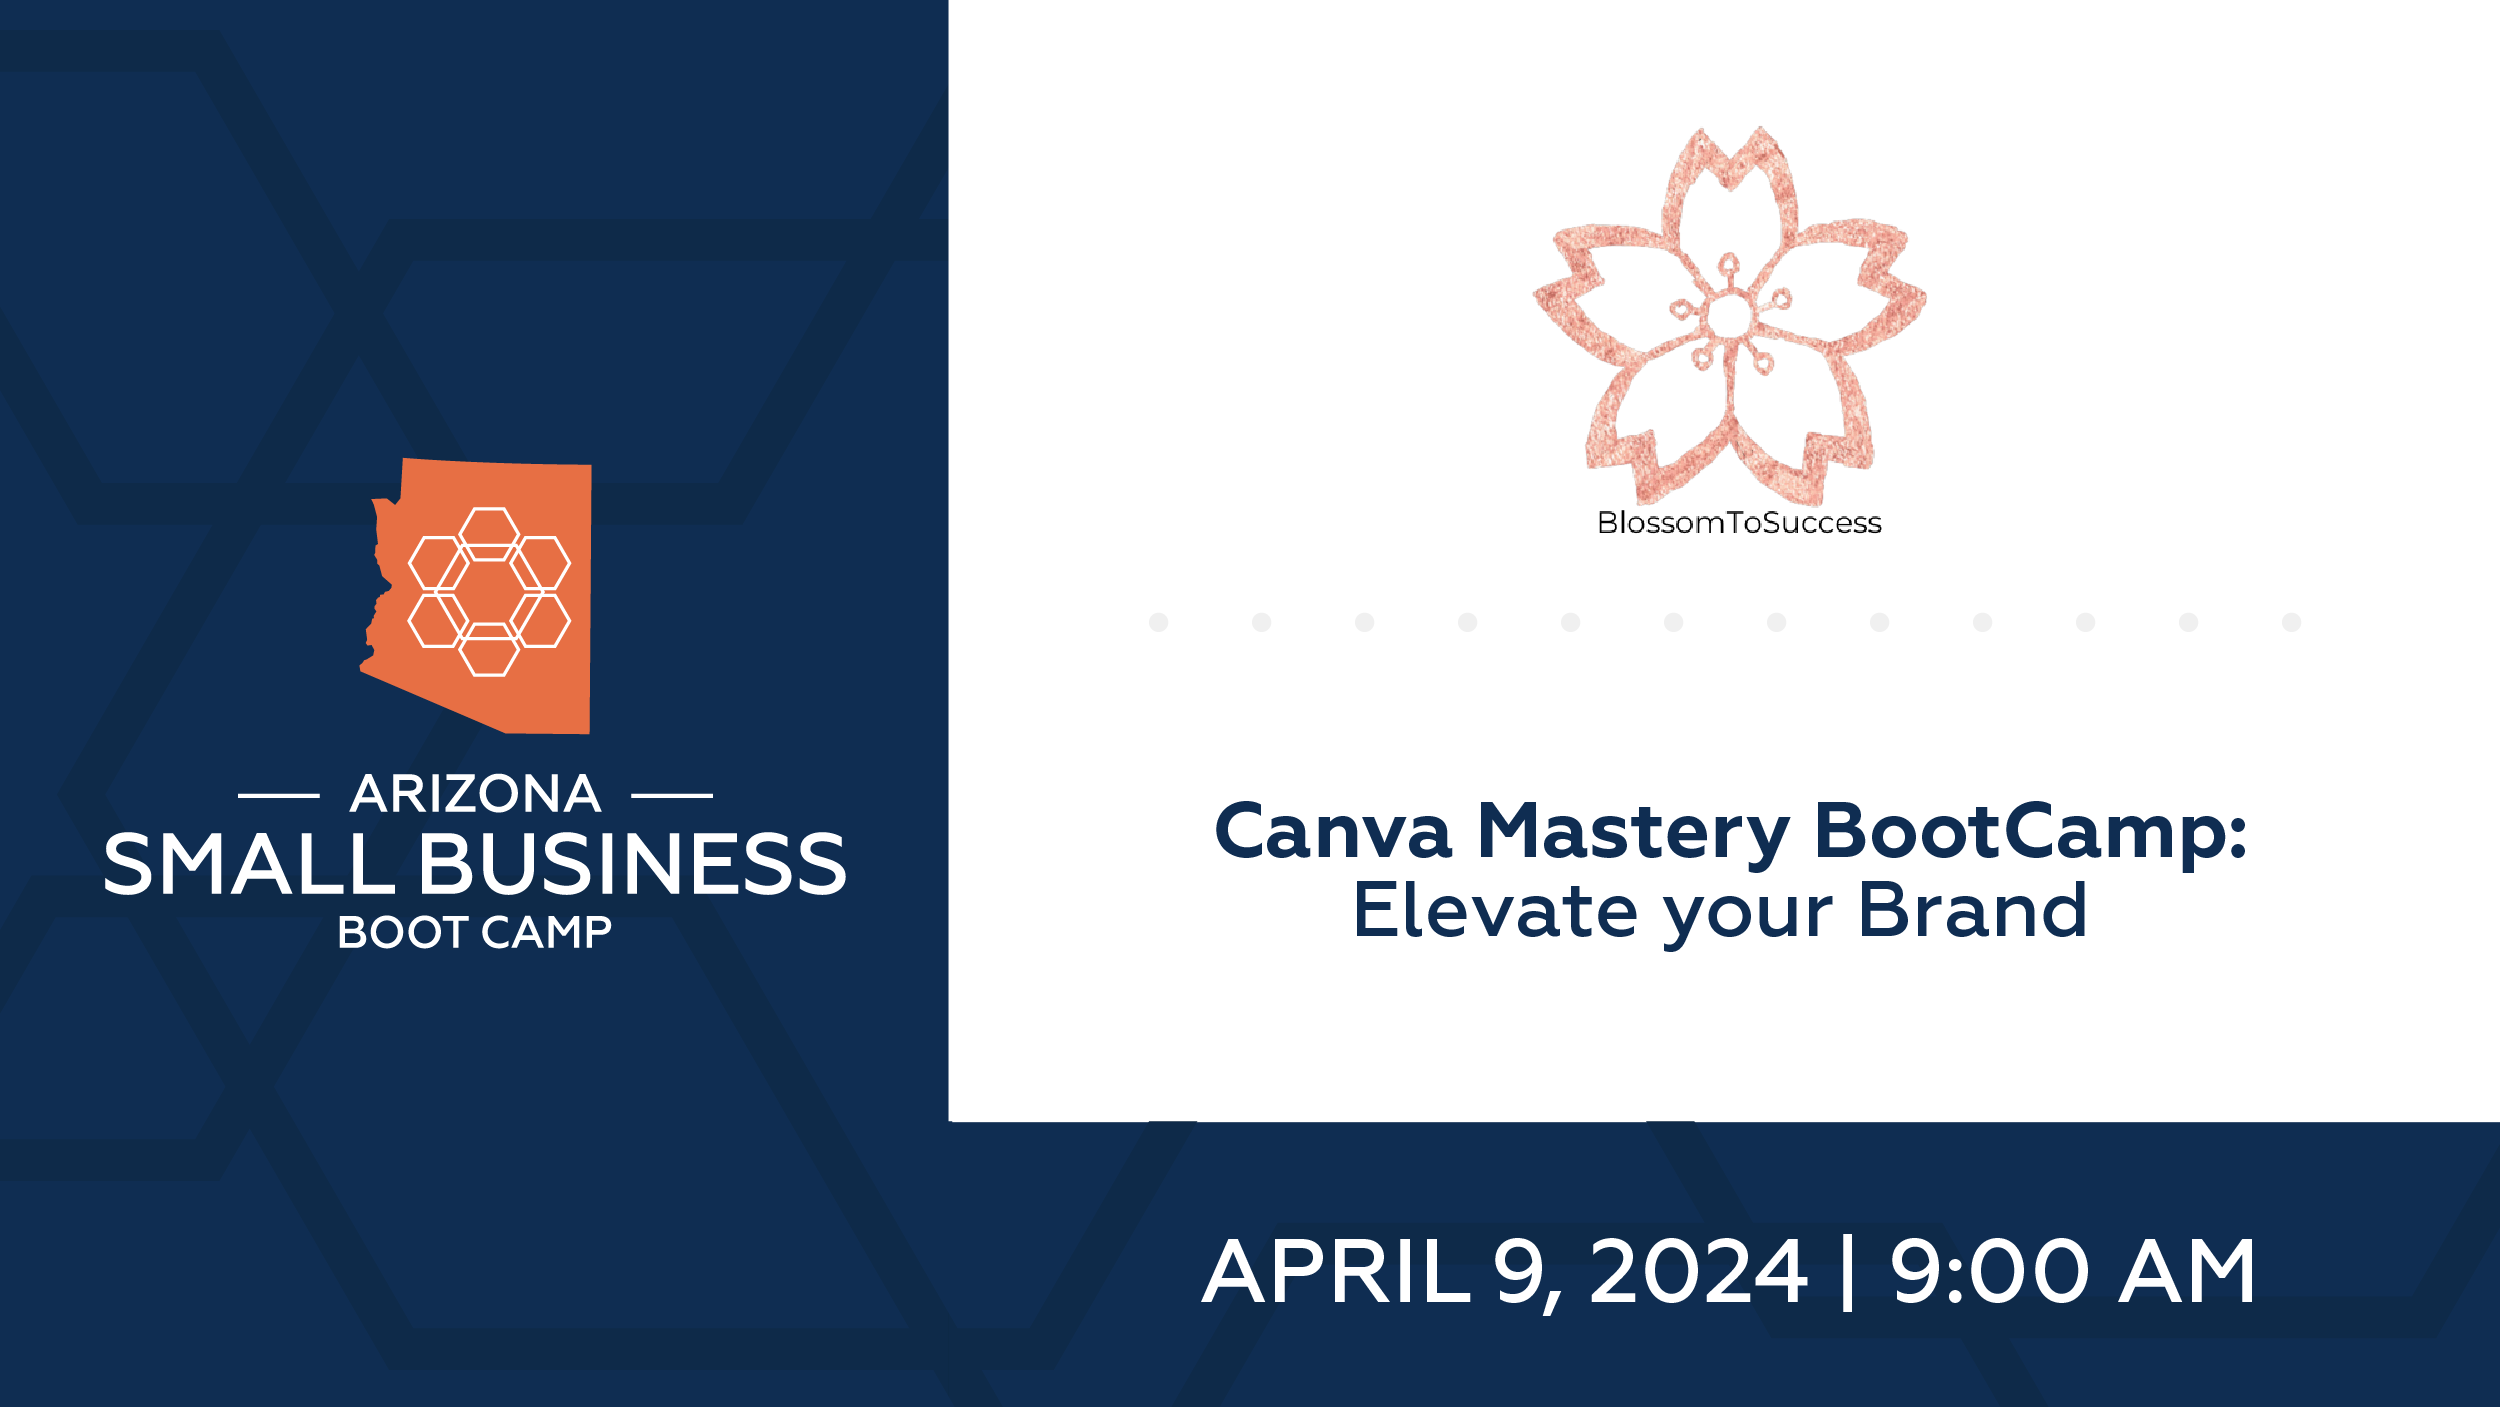 Canva Mastery Boot Camp: Elevate your Brand